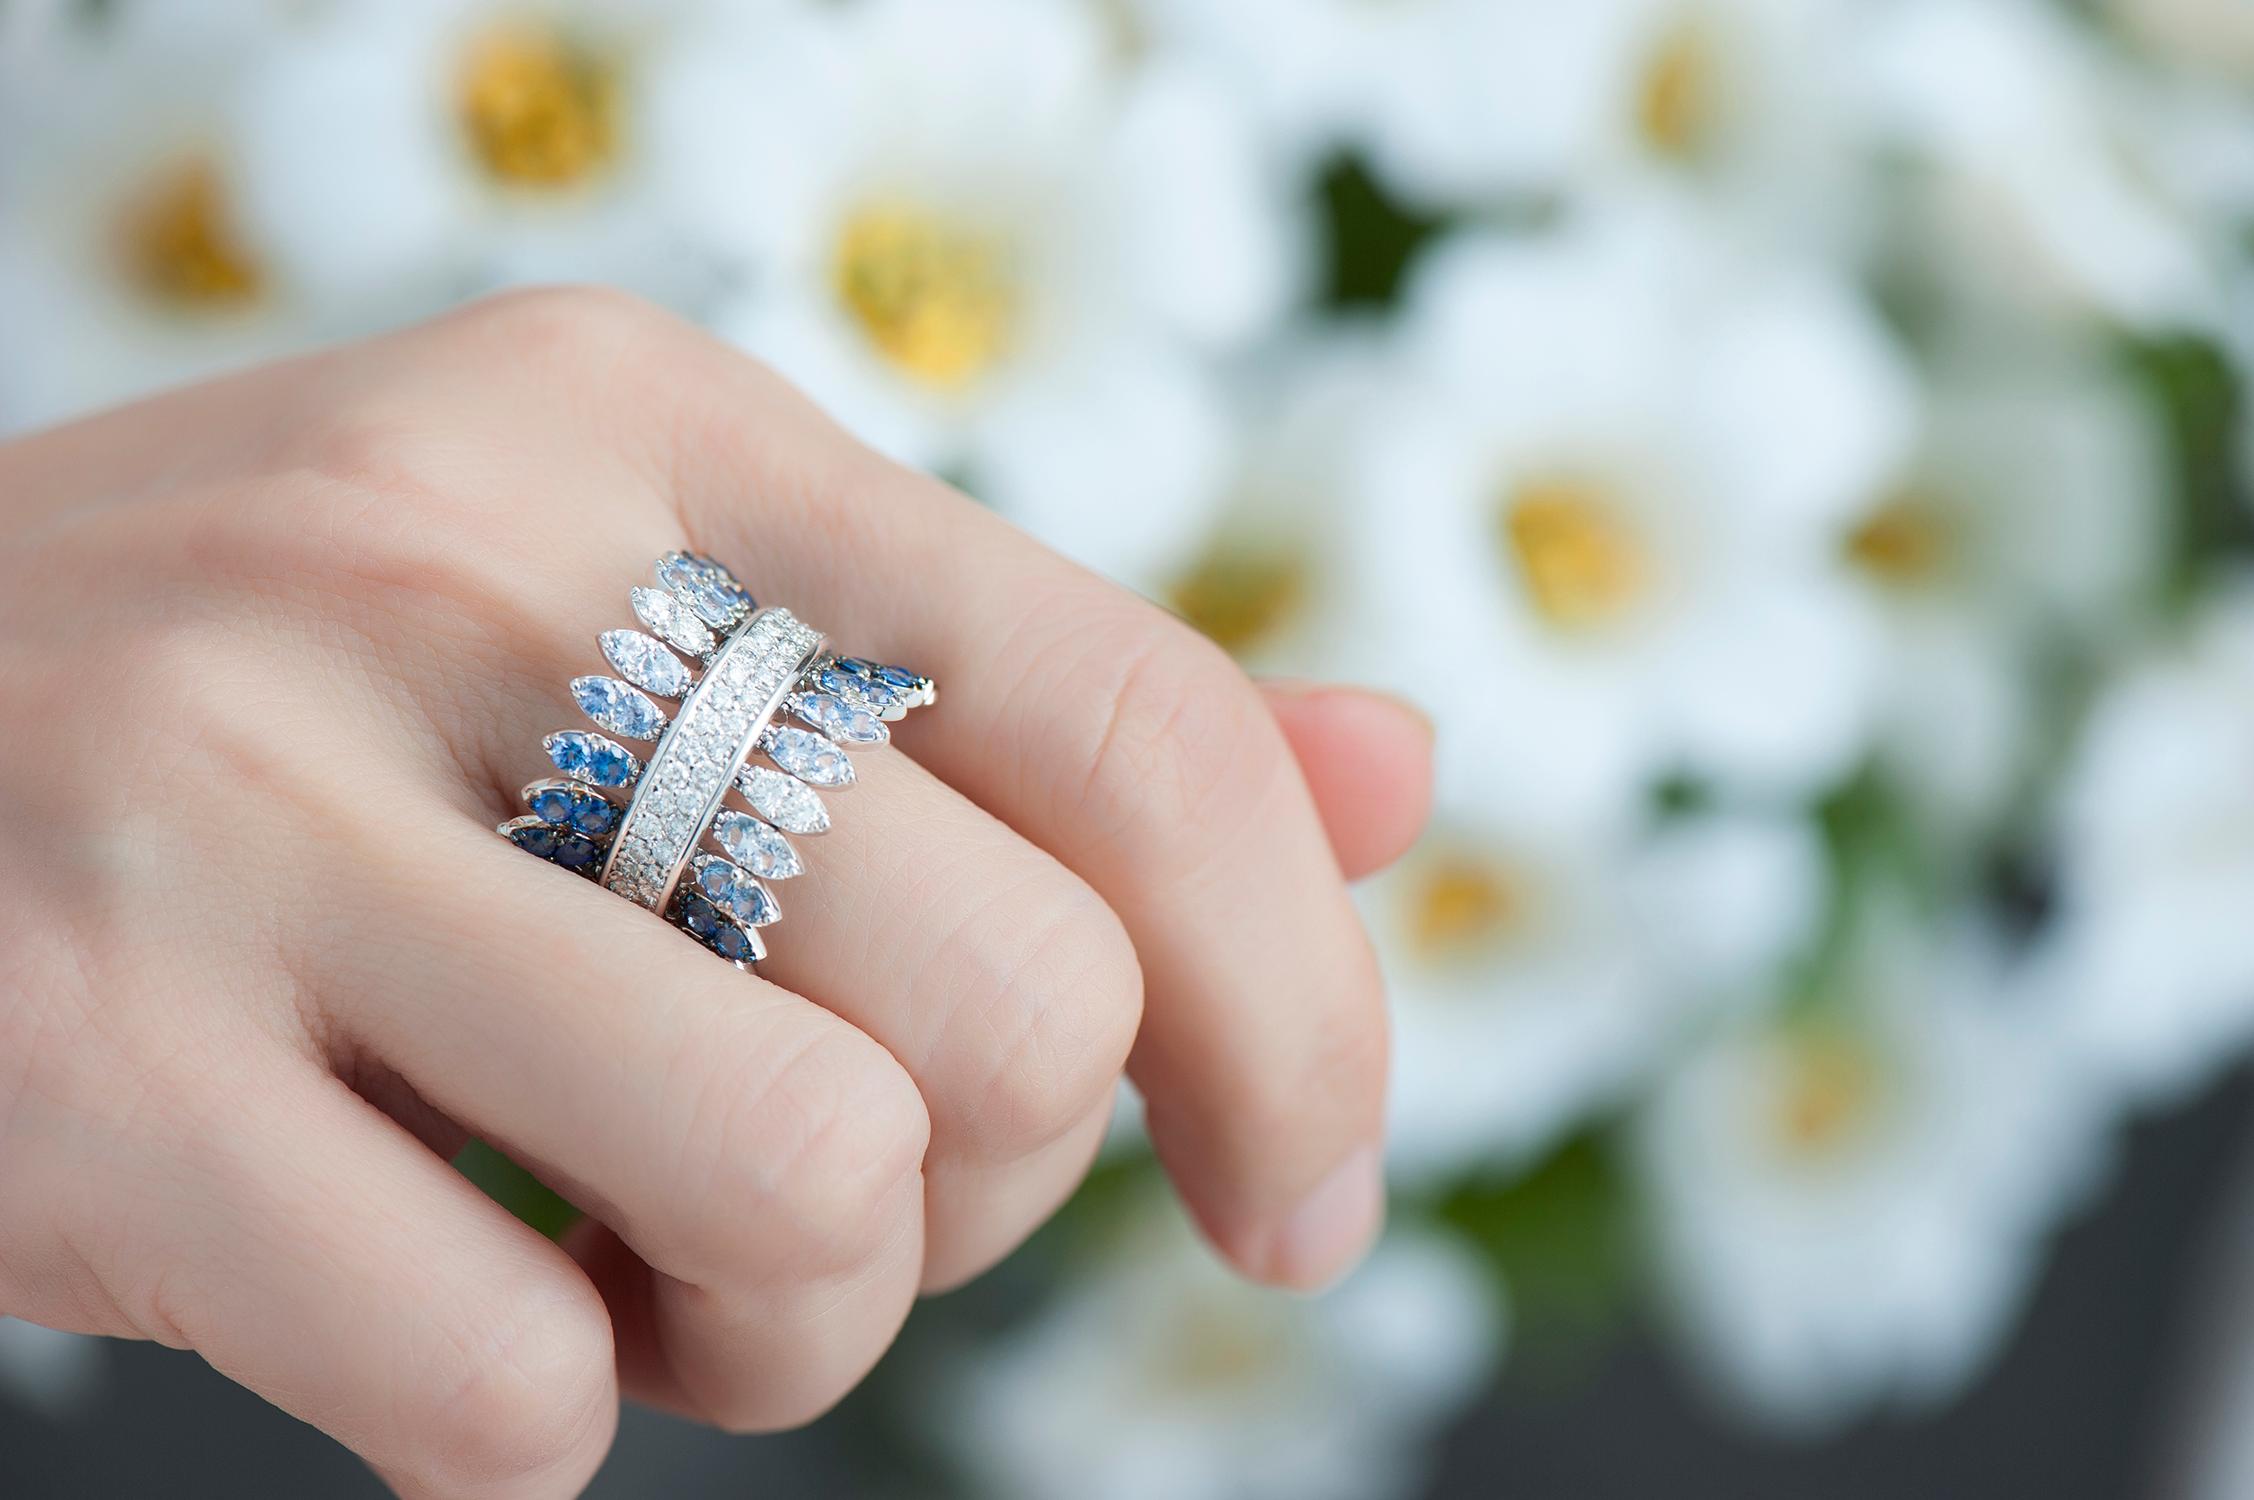 18K White Gold Spettinato Ring with White Diamonds and Blue Sapphires.
Petals are kinetic with movement.
Gold Weight: 10.30 grams
Carats: Diamond Carats: 0.80, Sapphire Carats: 2.21
FerrariFirenze, Handmade in Italy.
US Ring Size: 5
Style: